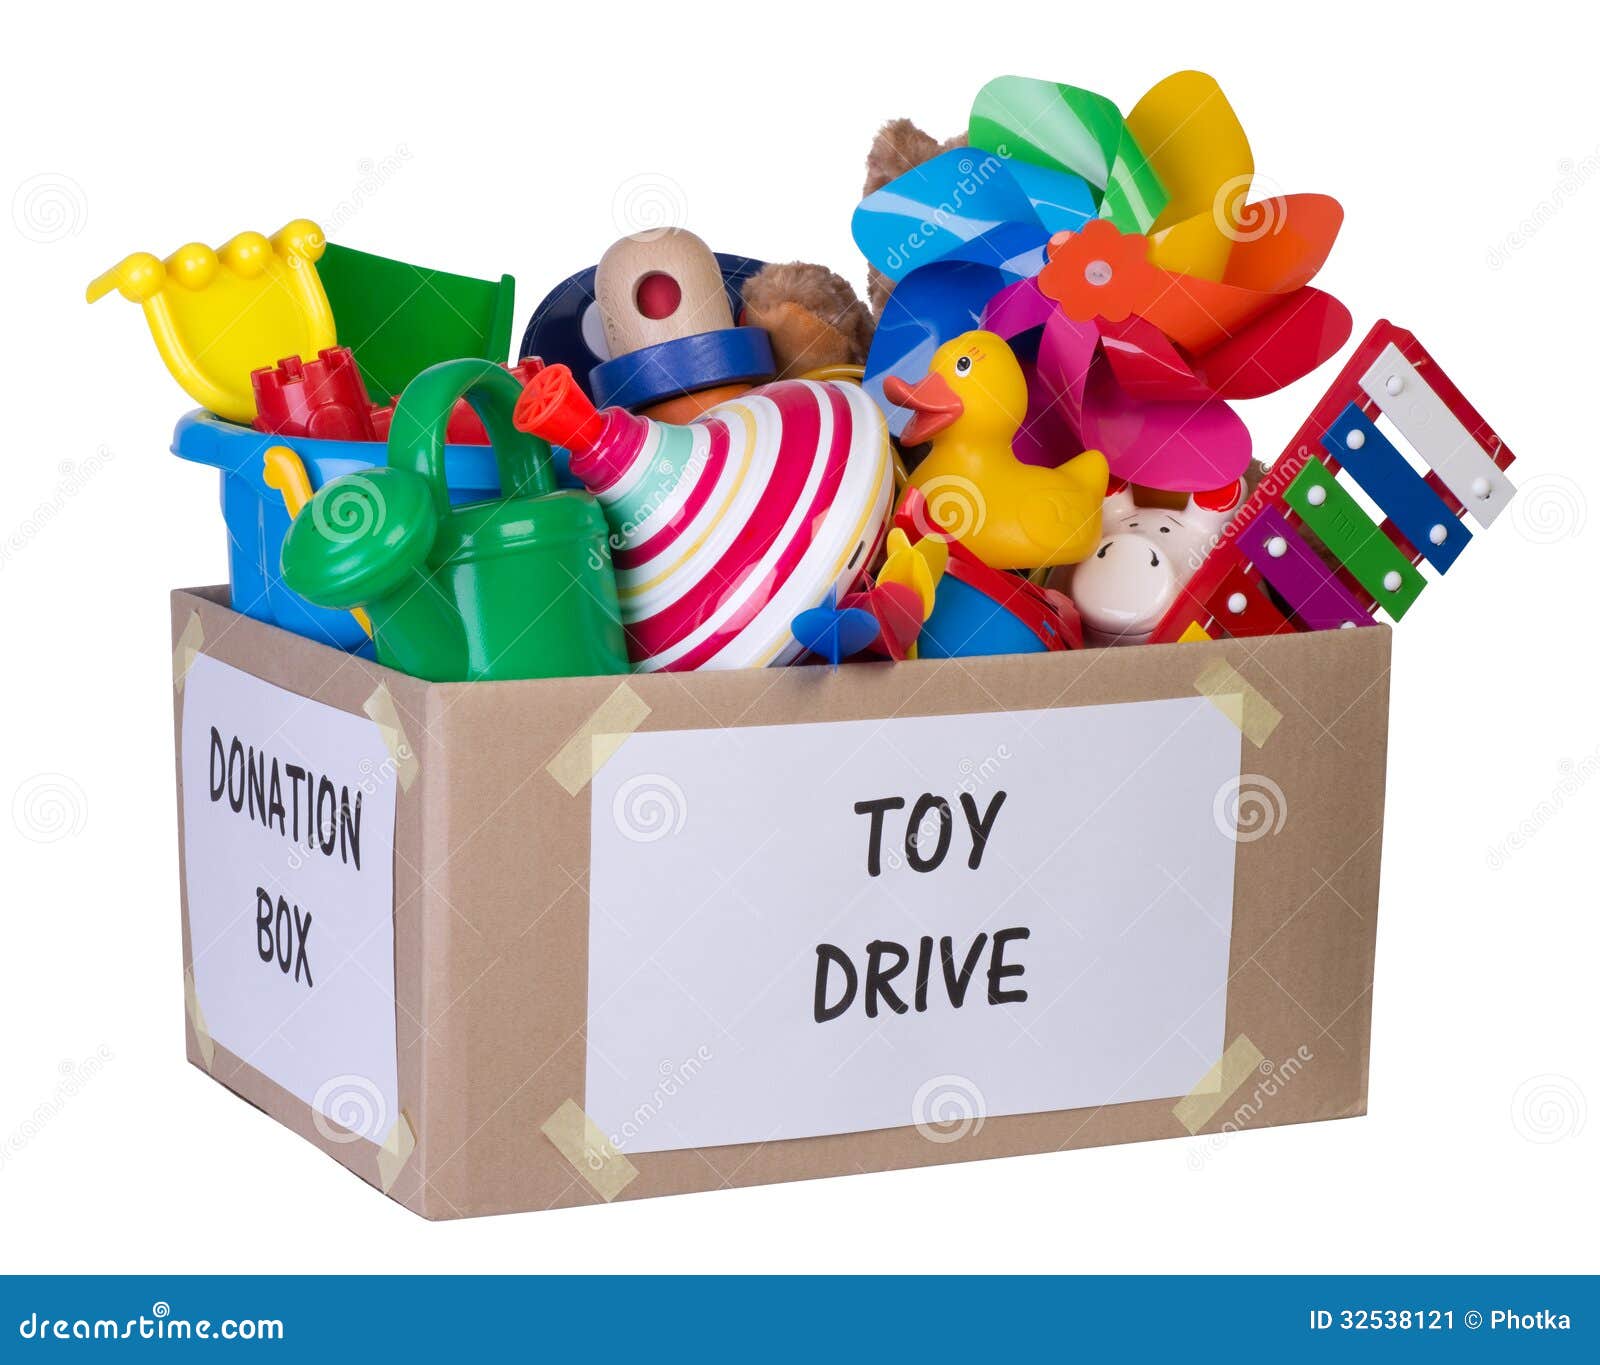 Donations Of Toys 61